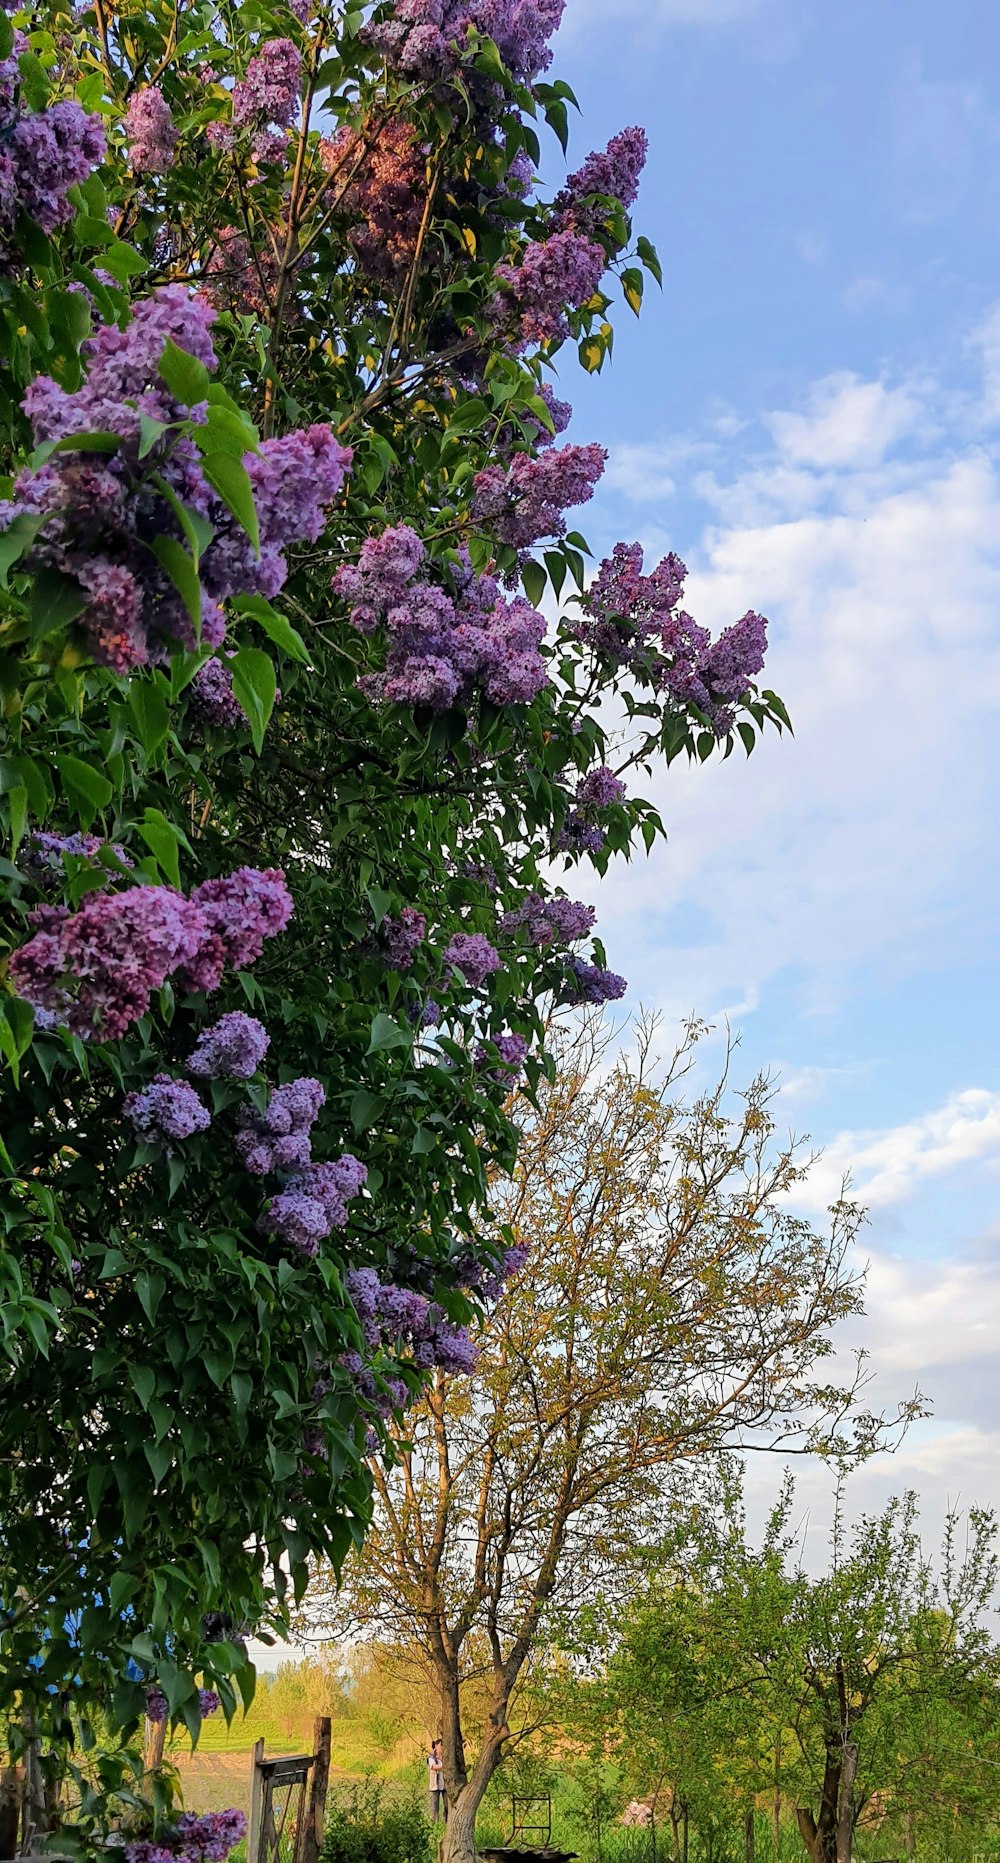 a bench sitting next to a tree filled with purple flowers